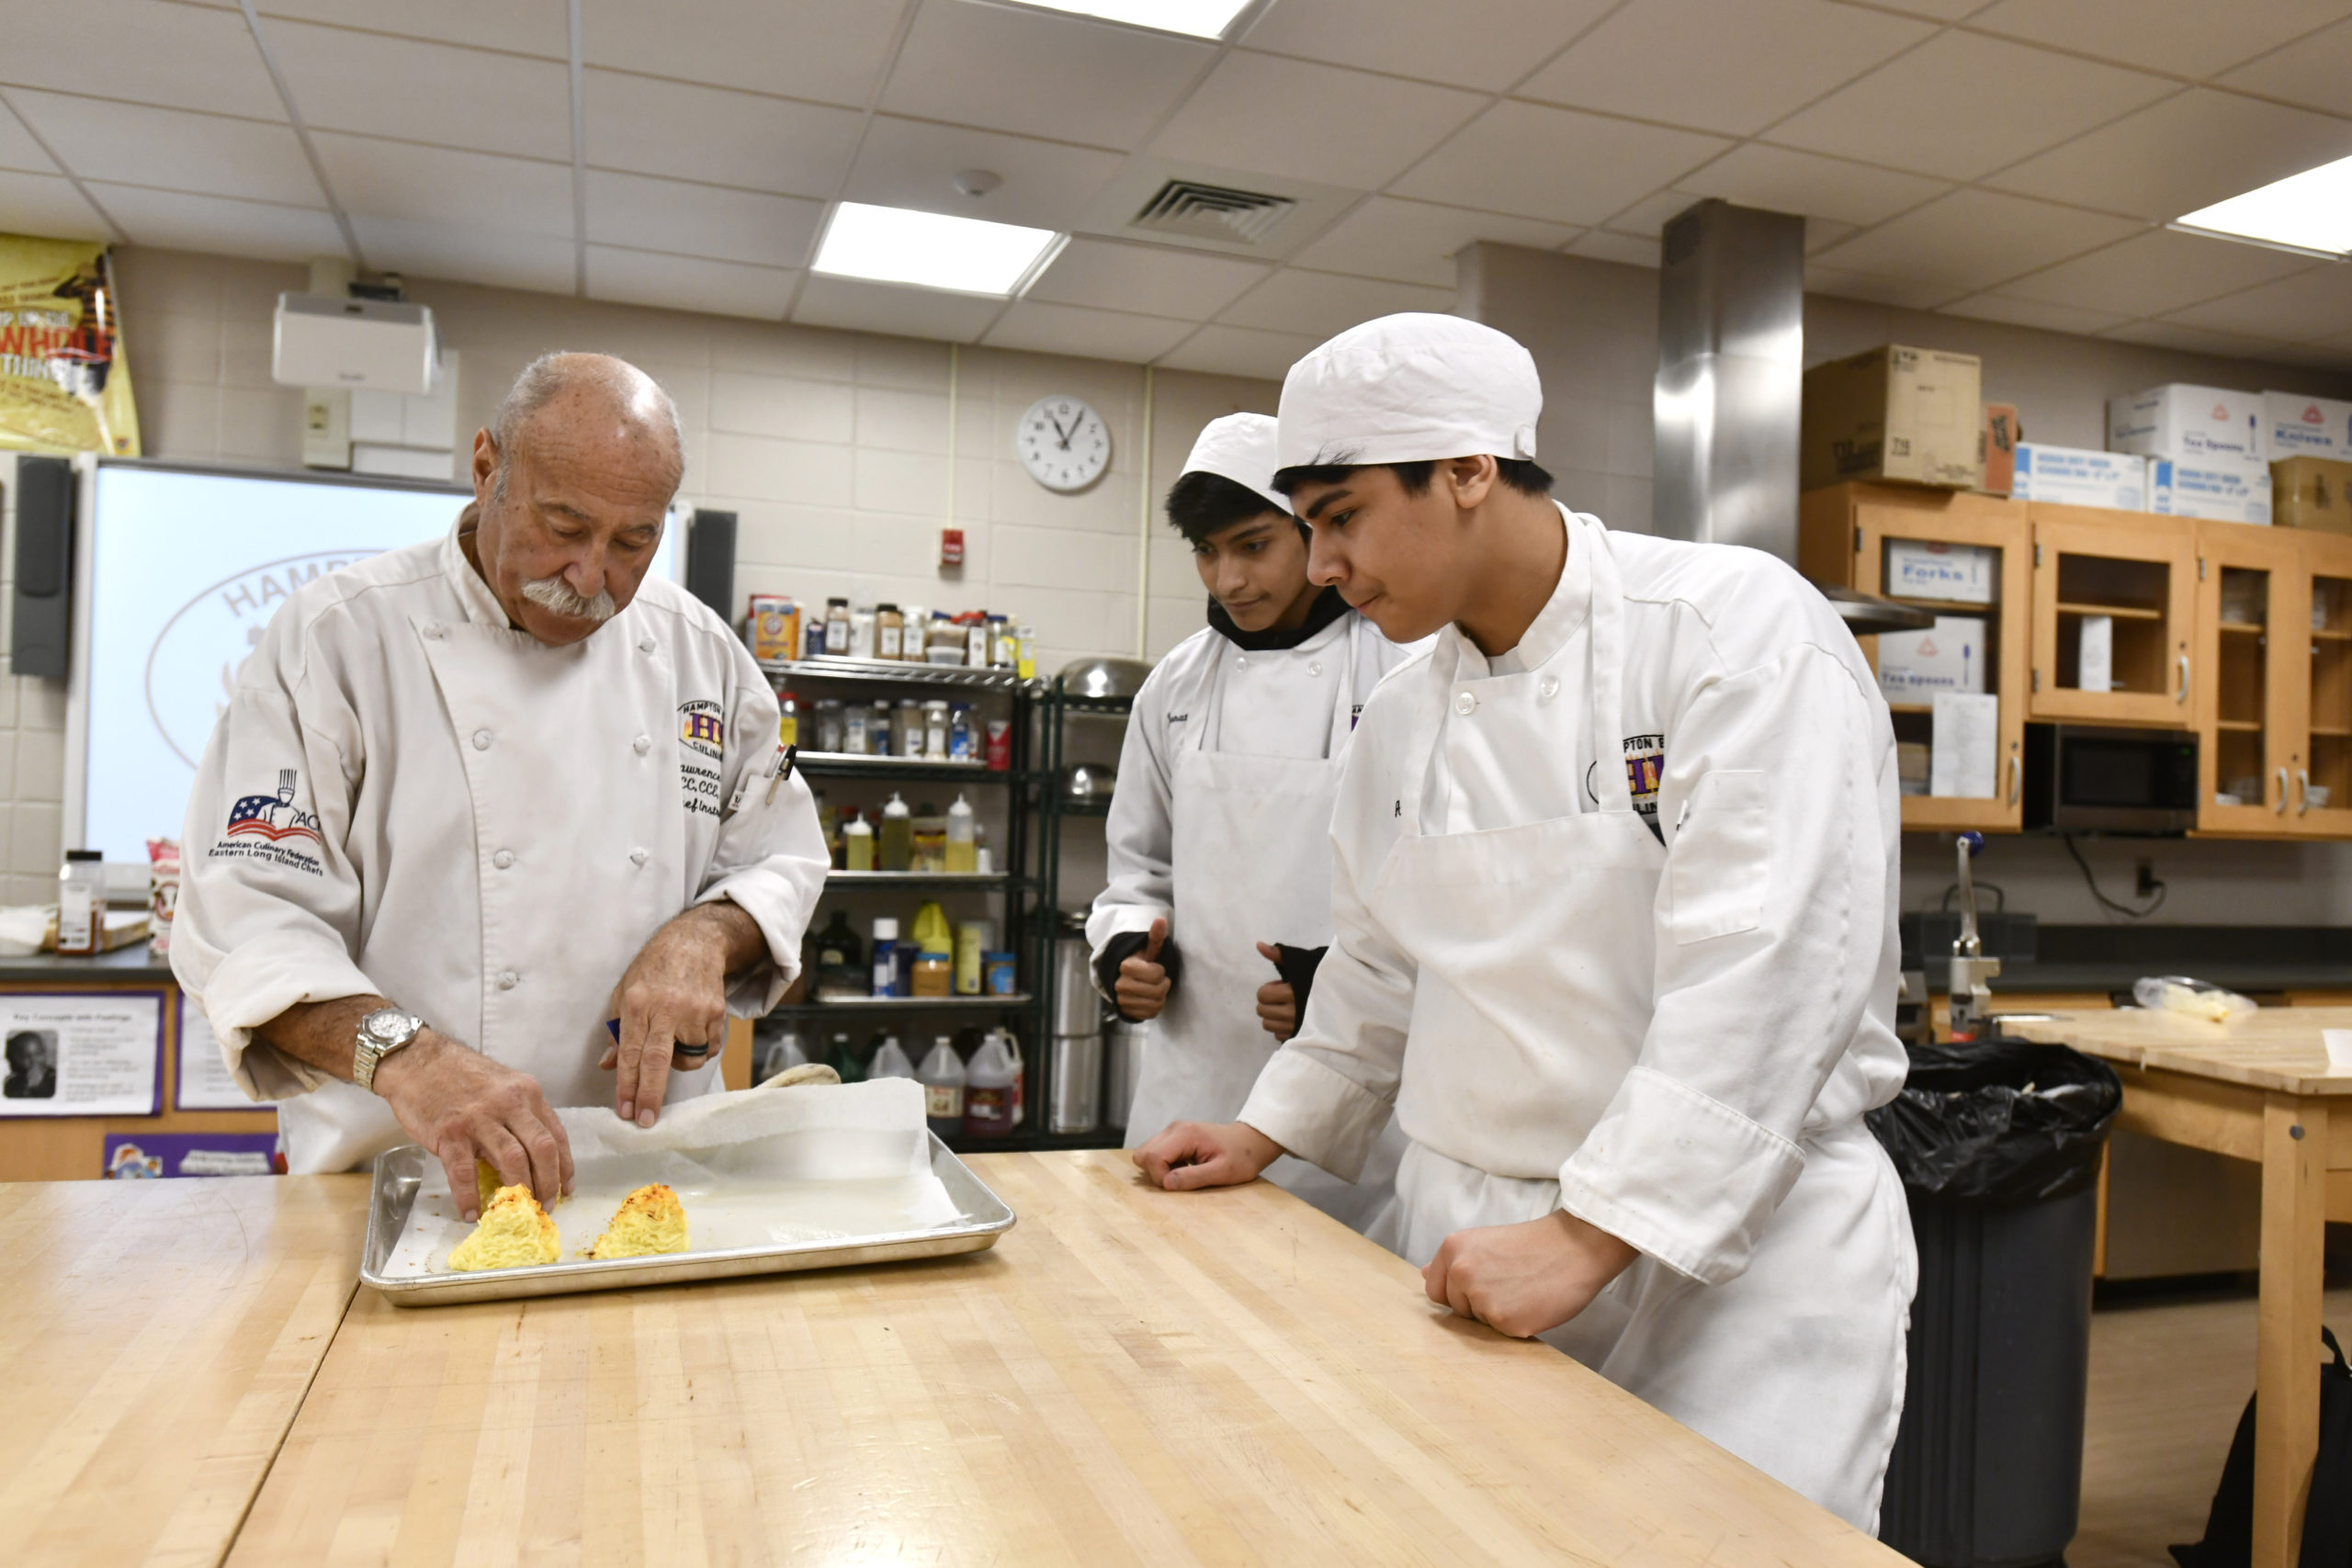 Chef Larry Weiss works with his students during the culinary class at Hampton Bays High School on Thursday, February 6. DANA SHAW